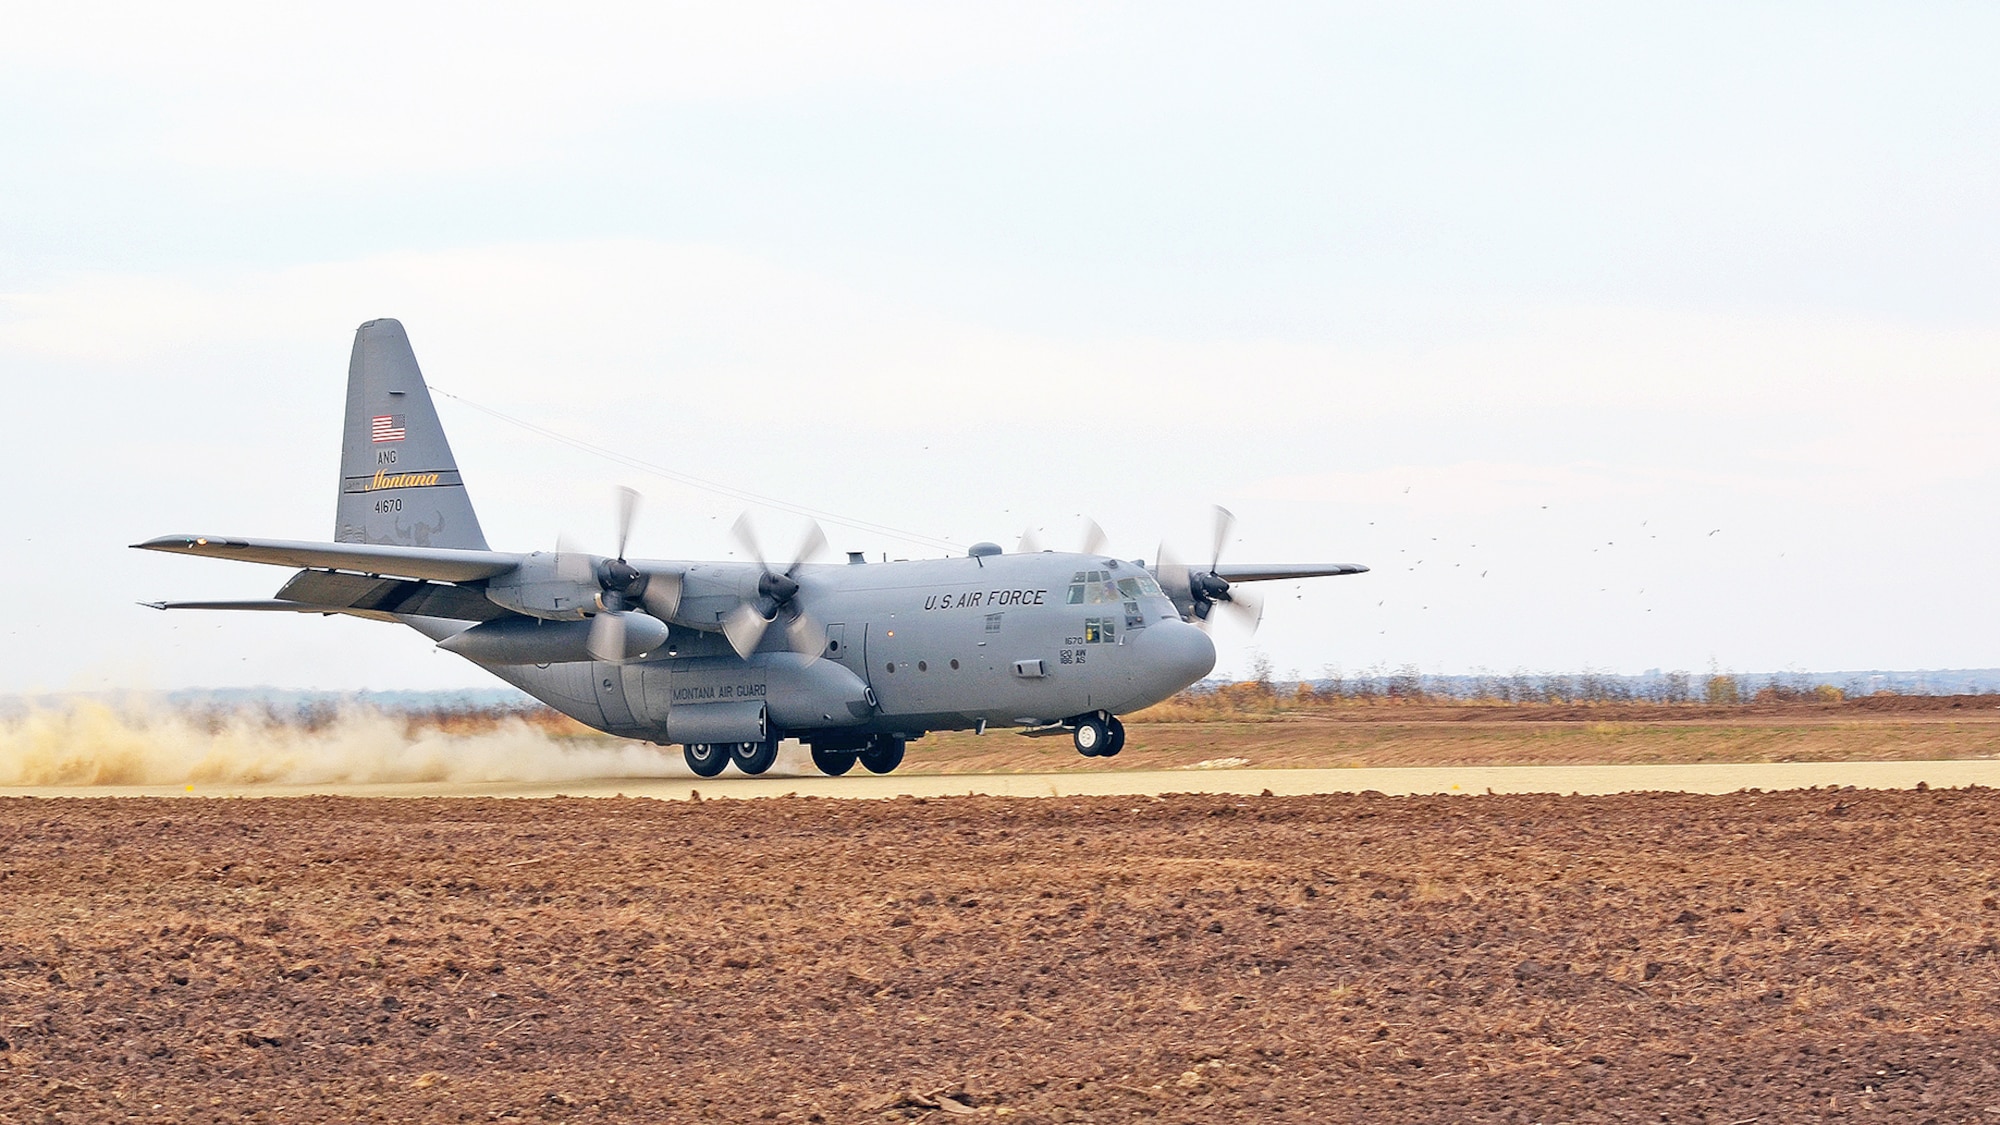 A C-130 Hercules lands on a dirt landing strip Oct. 27 at Fort Riley, Kan. The landing was part of a Joint Airborne Air Transportability Training exercise between the Army and the Air Force Oct. 27 to 29 to validate a new flight landing strip. The landing strip is one of two austere landing strips in the Army nationwide. (U.S. Army photo/Staff Sgt. Aaron P. Duncan)